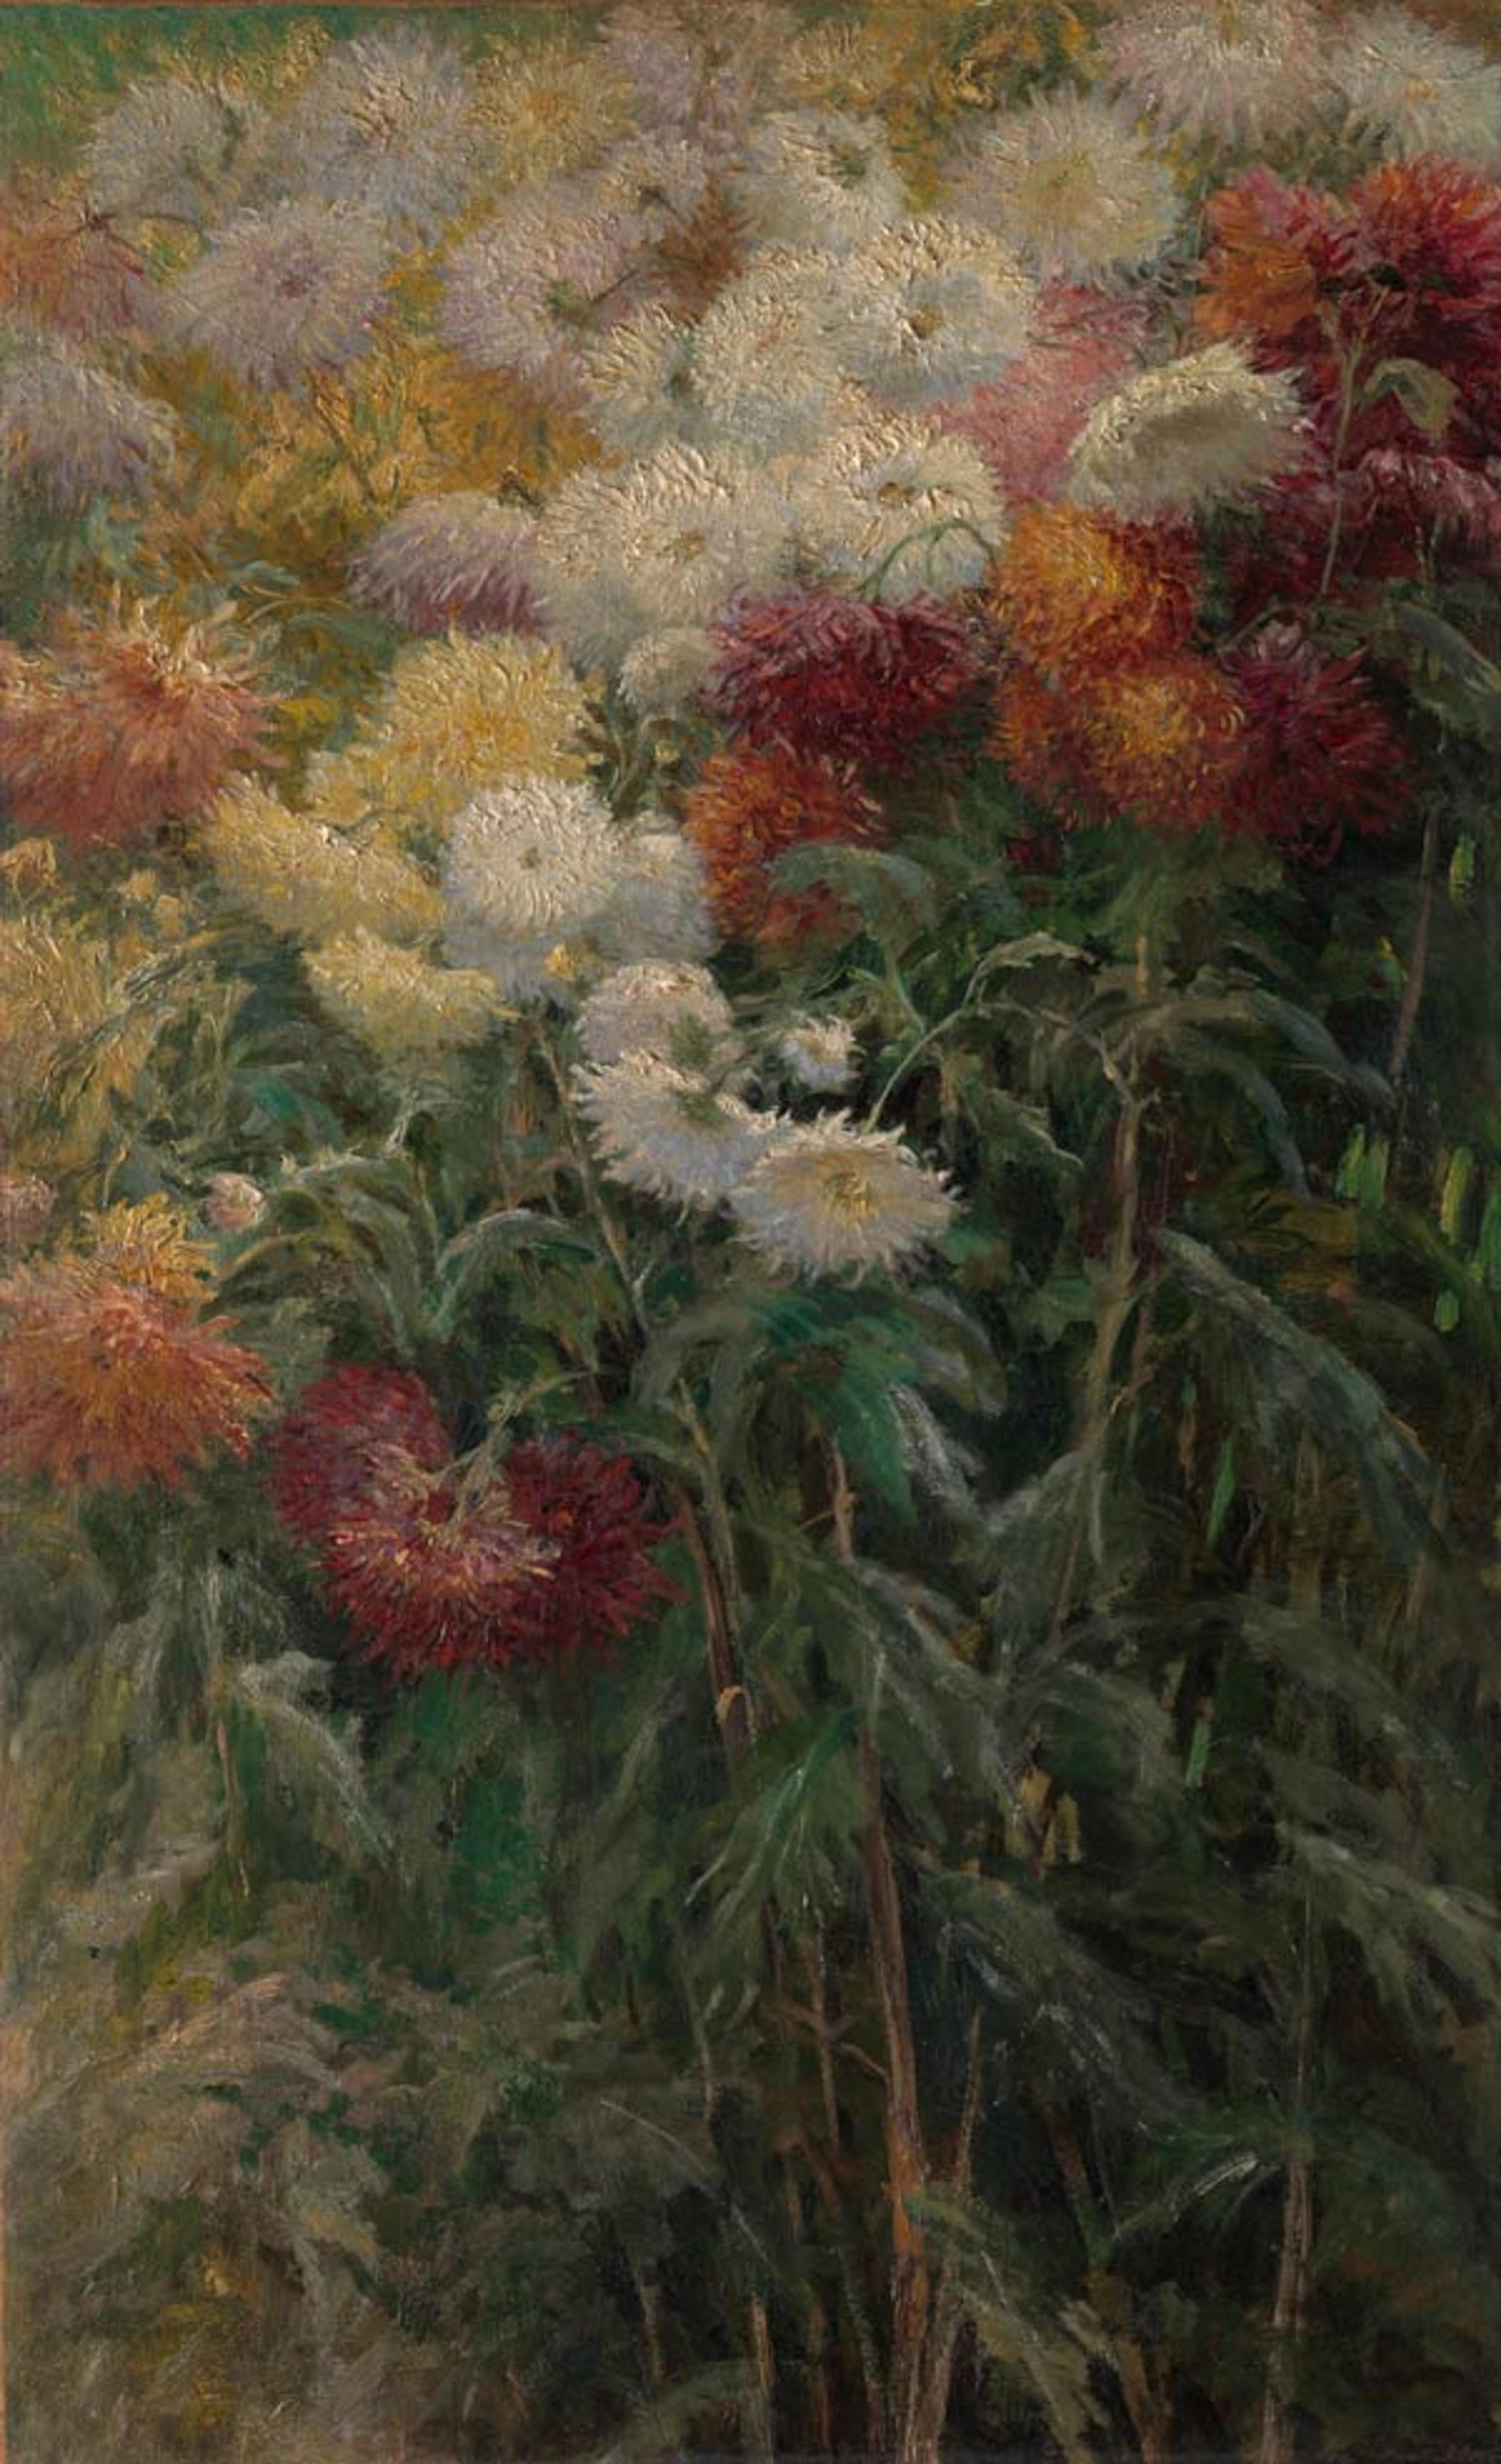 Gustave Caillebotte (French, 1848–1894). Chrysanthemums in the Garden at Petit-Gennevilliers, 1893. Oil on canvas; 38 5/8 x 23 1/2 in. (98 x 59.8 cm). The Metropolitan Museum of Art, New York, Gift of the Honorable John C. Whitehead, 2014 (2014.736)